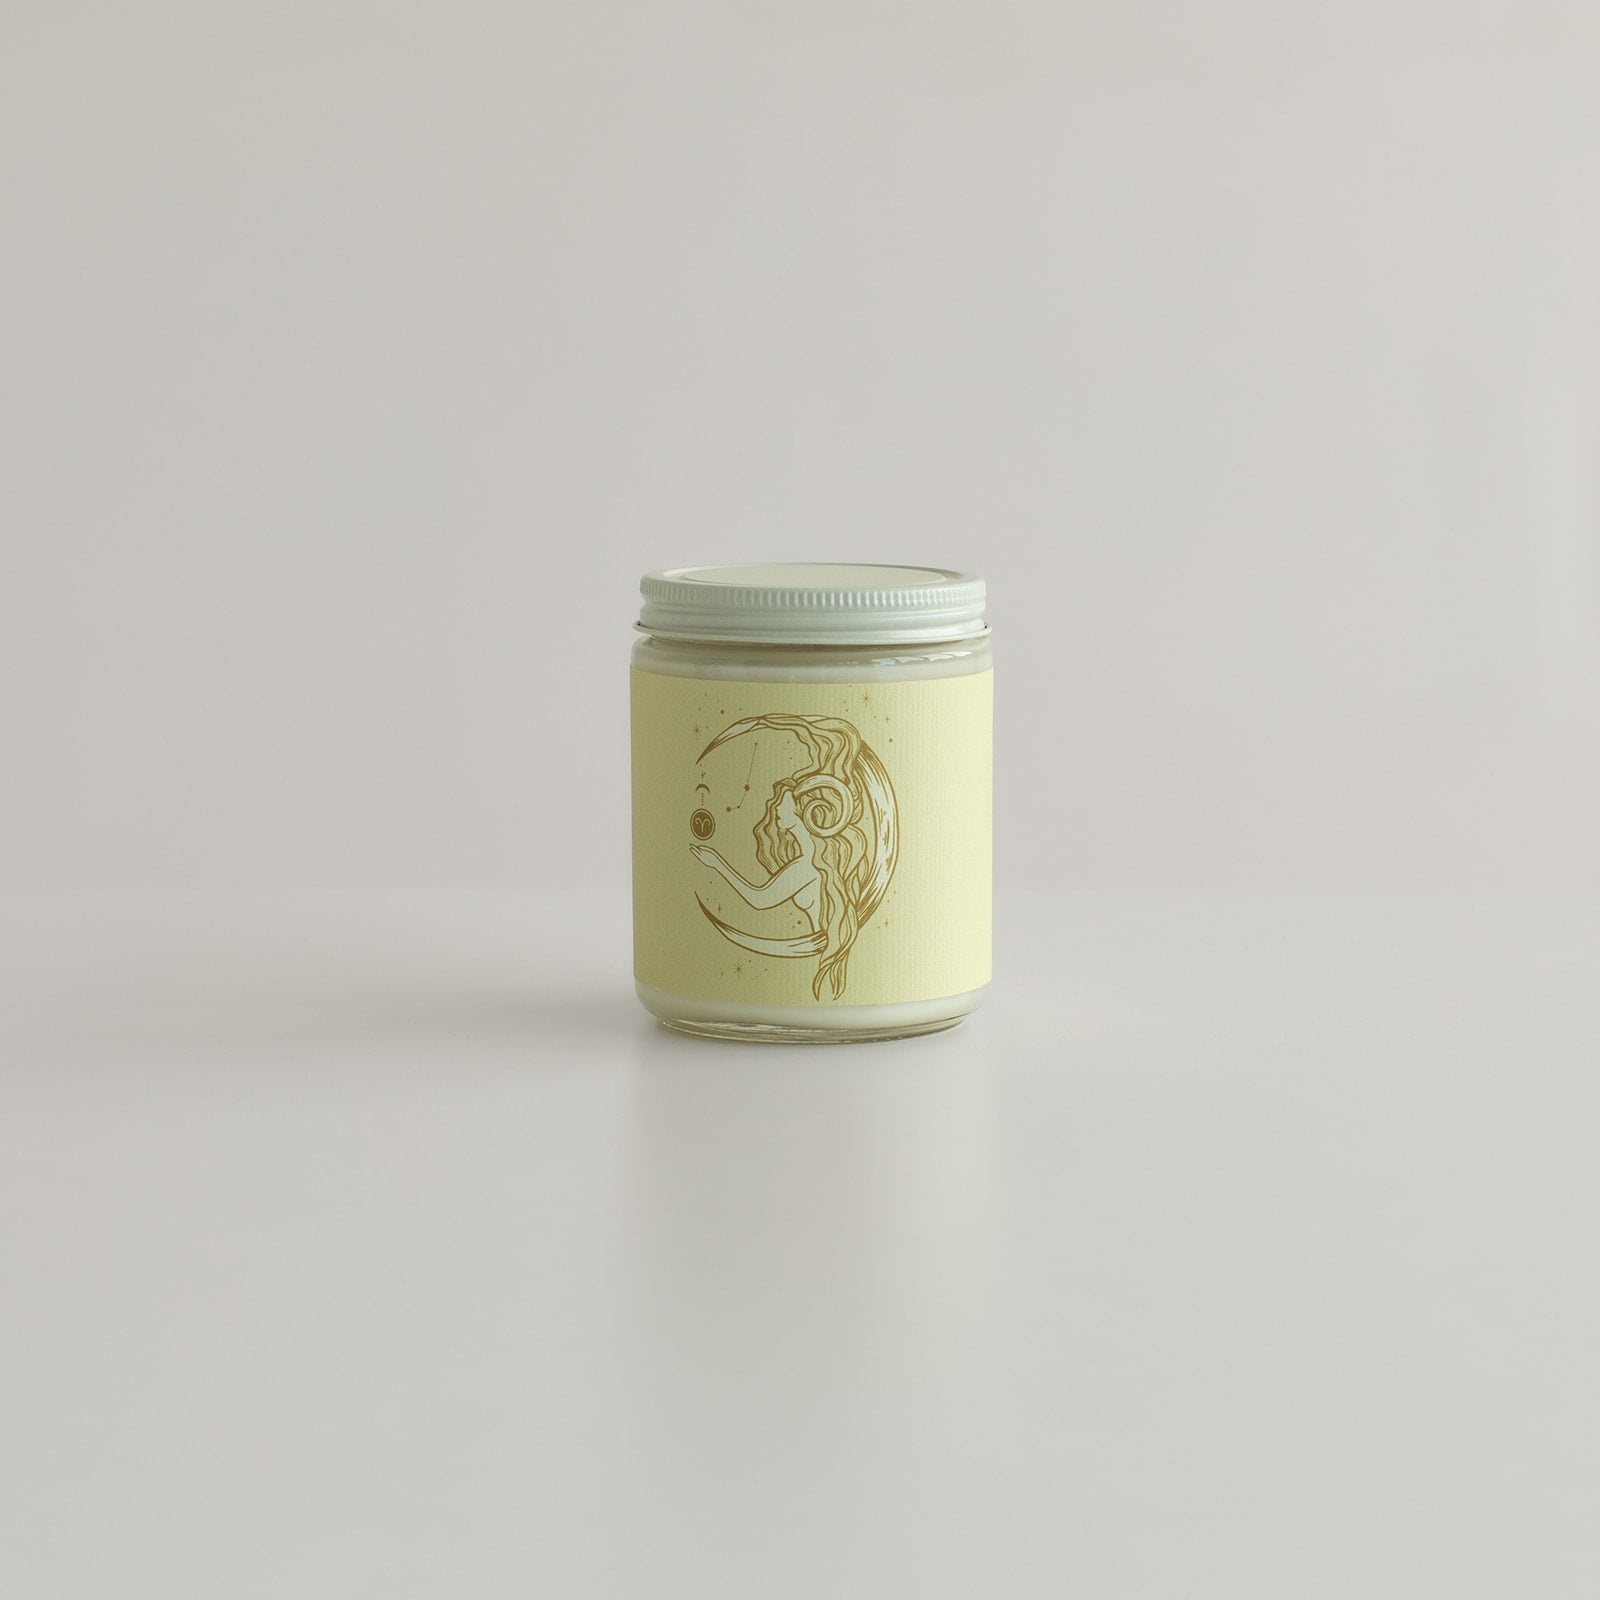 Aries season birthday candle with ram and crescent moon in a candle jar